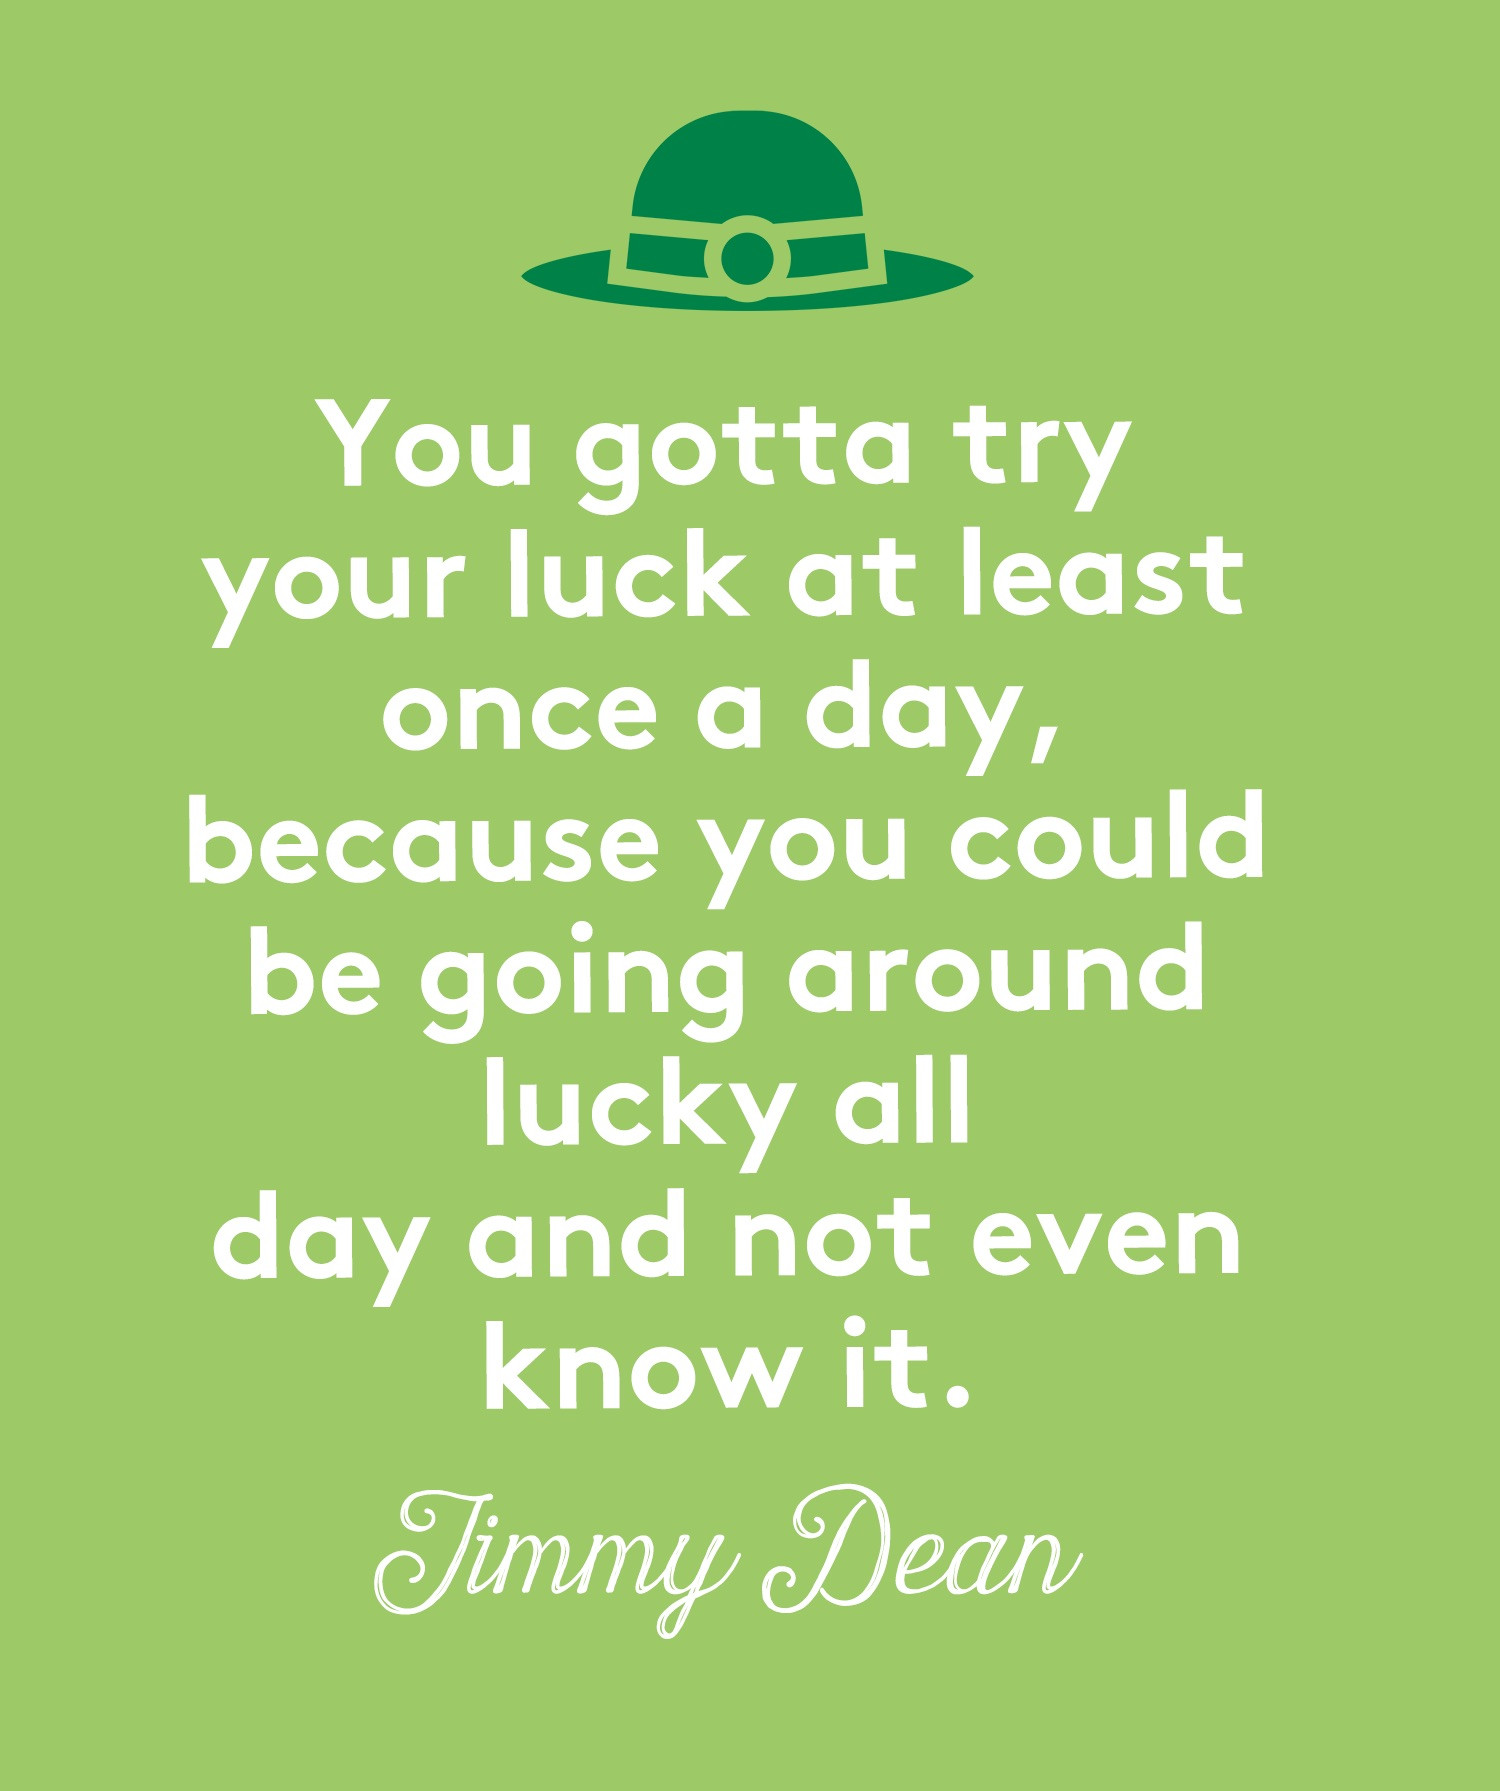 St Patrick Day Pictures And Quotes
 9 St Patrick’s Day Memes and Quotes You’ll Send to